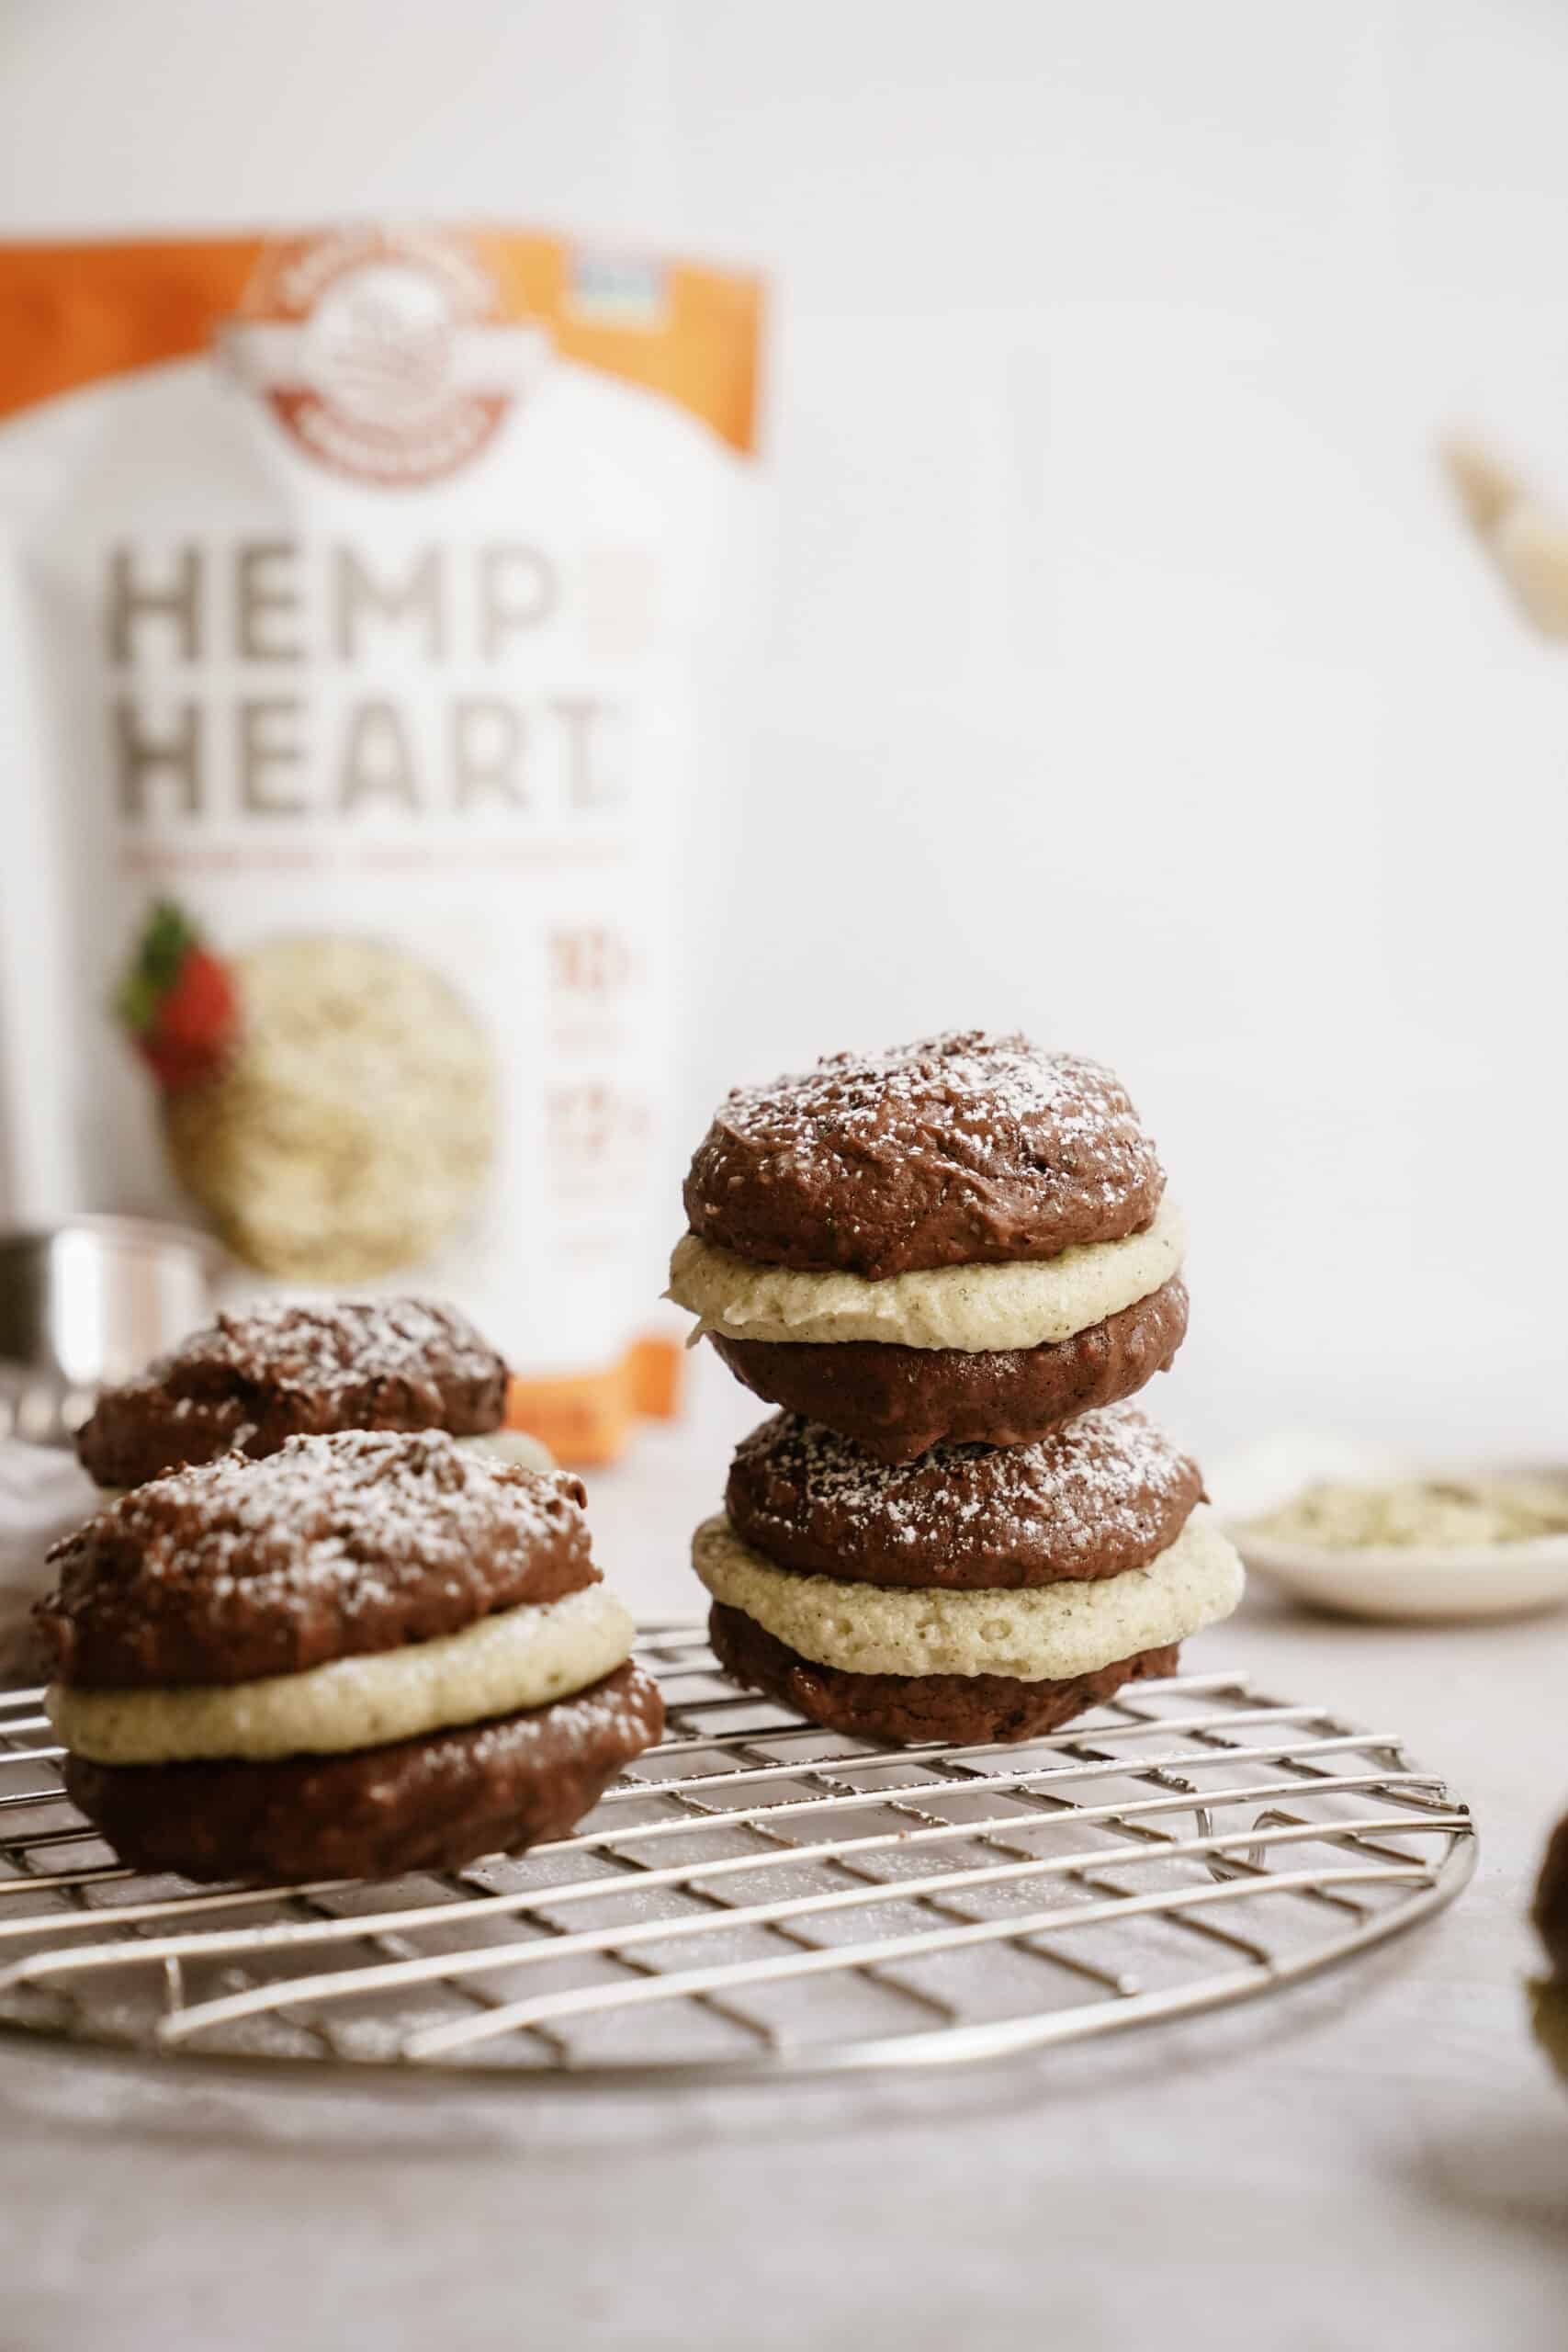 Whoopie pie recipe with pies on cooling rack